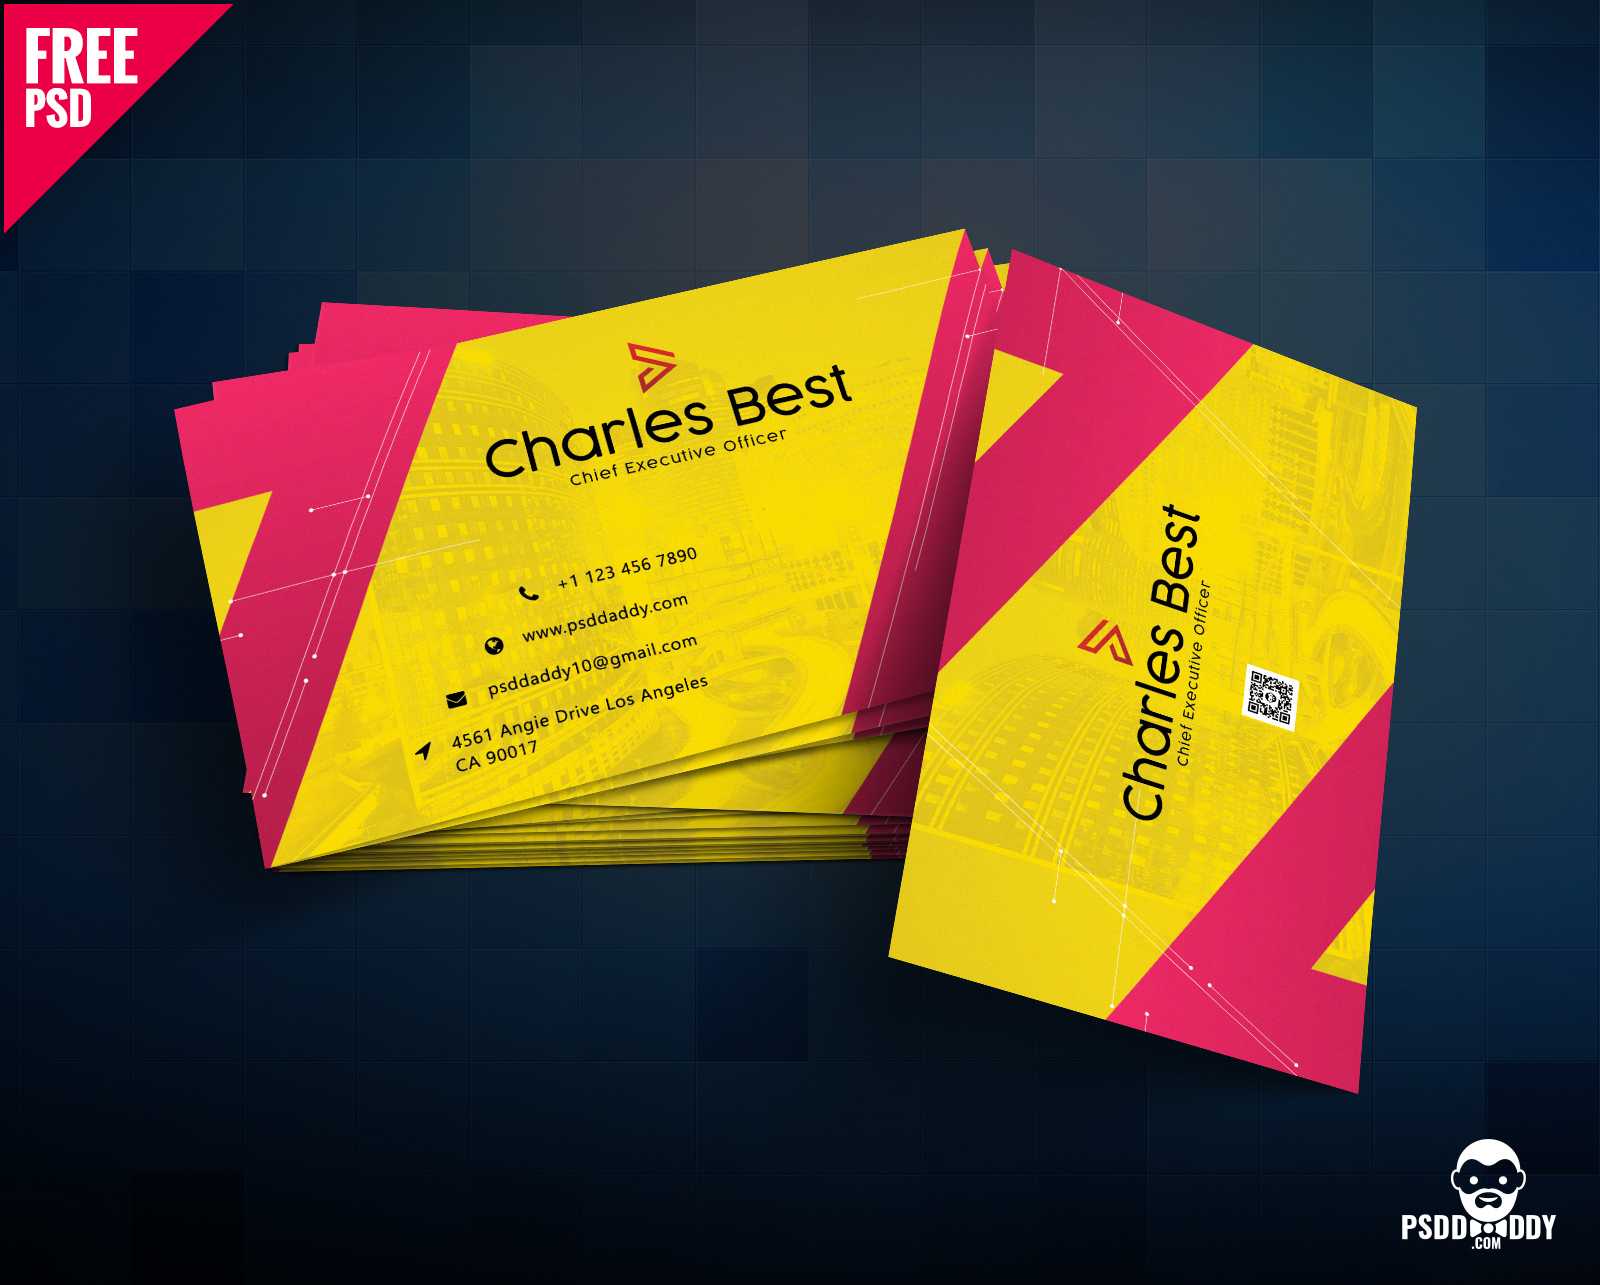 Download] Creative Business Card Free Psd | Psddaddy Throughout Visiting Card Templates Download